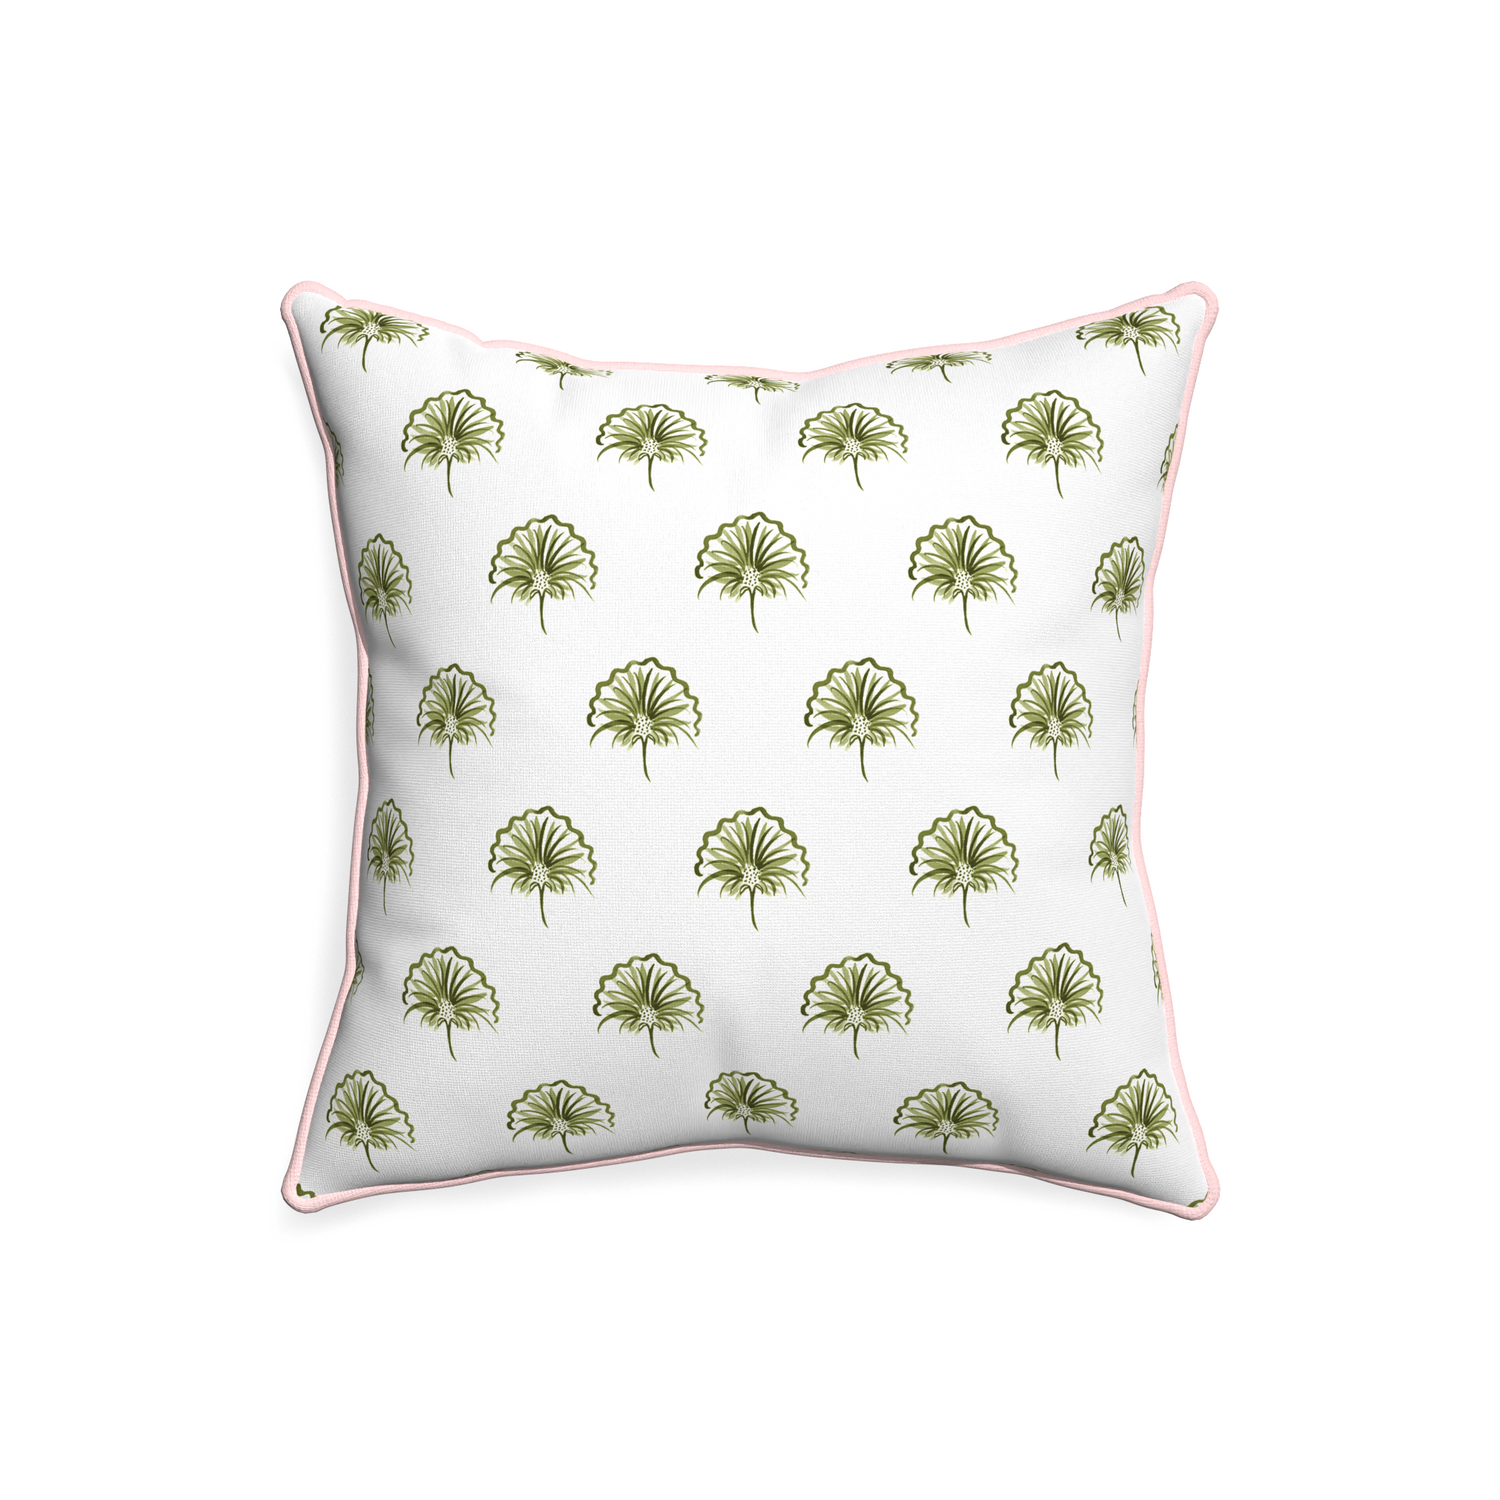 20-square penelope moss custom green floralpillow with petal piping on white background